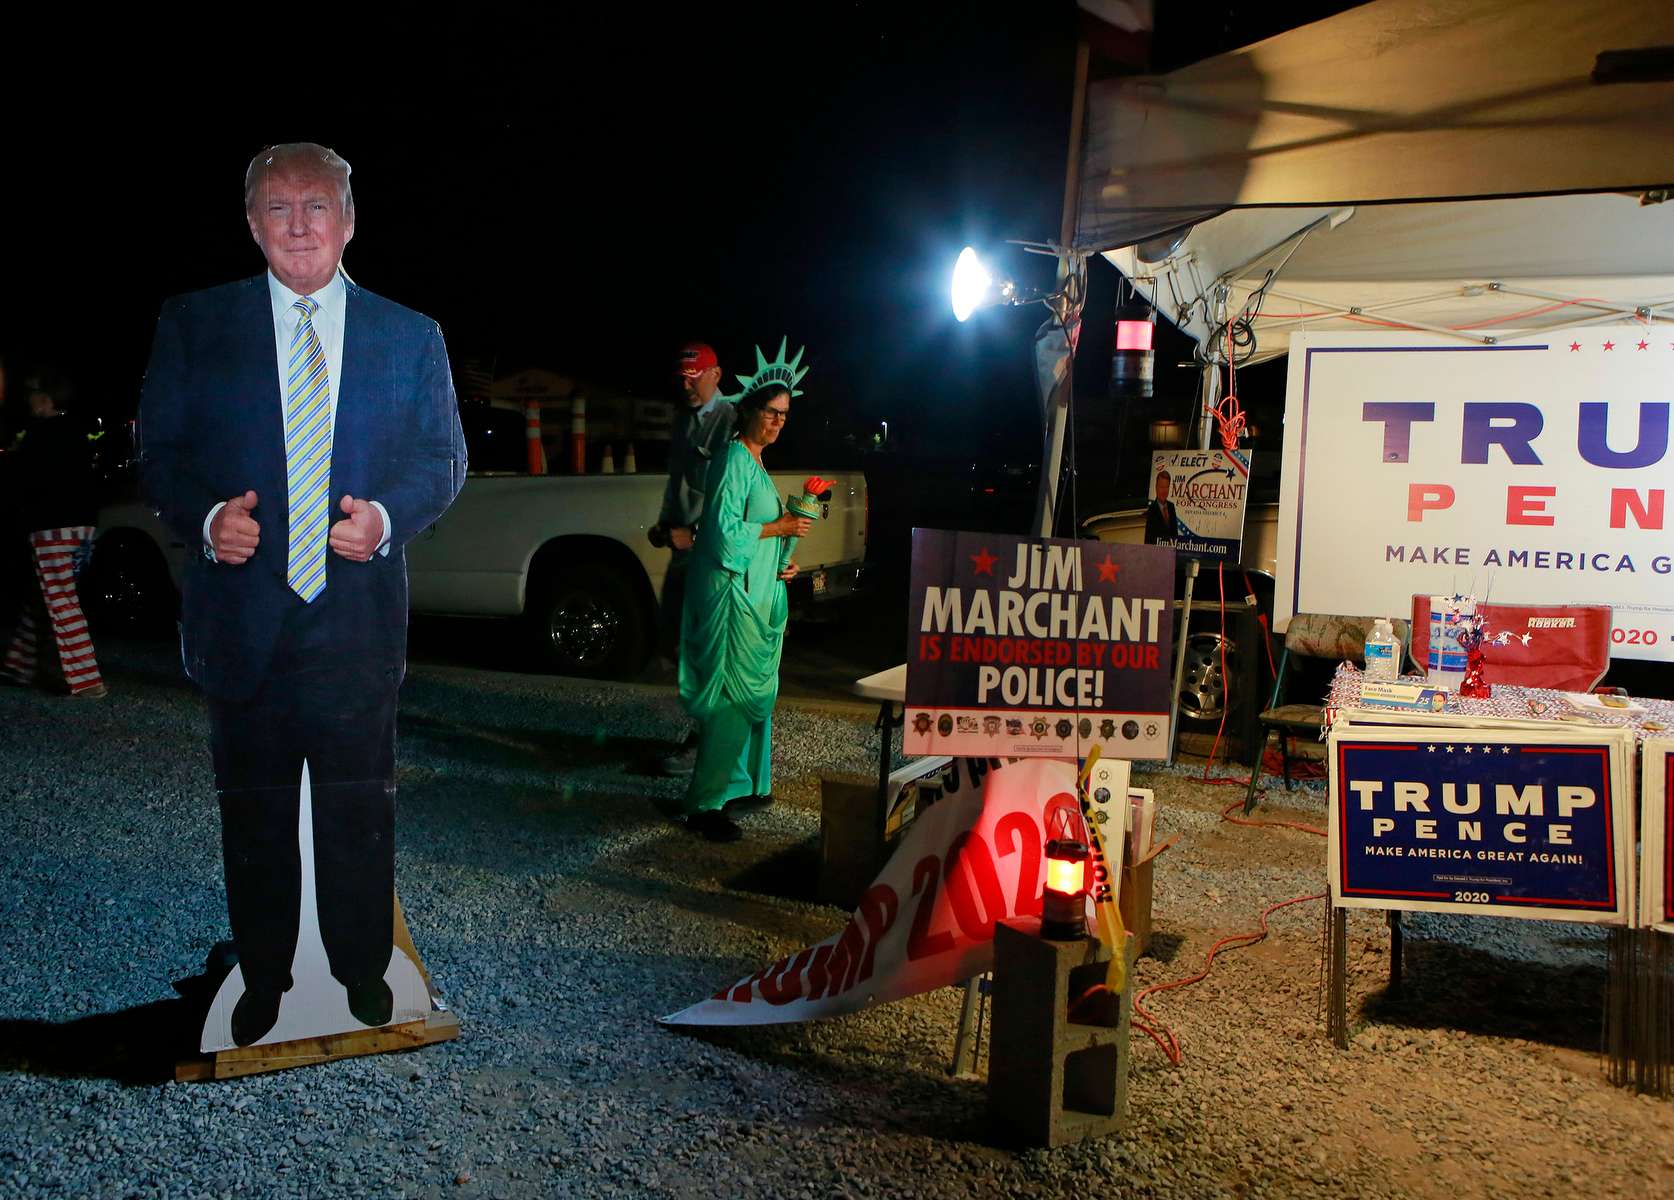 Pamela Morgan, dressed as Lady Liberty, and a President Trump cardboard cutout are shown near Bob Ruud Community Center on Election Day Tuesday, November 3, 2020, in Pahrump, Nevada. A tent of Trump supporters were set up within guidelines adjacent to the polling station.